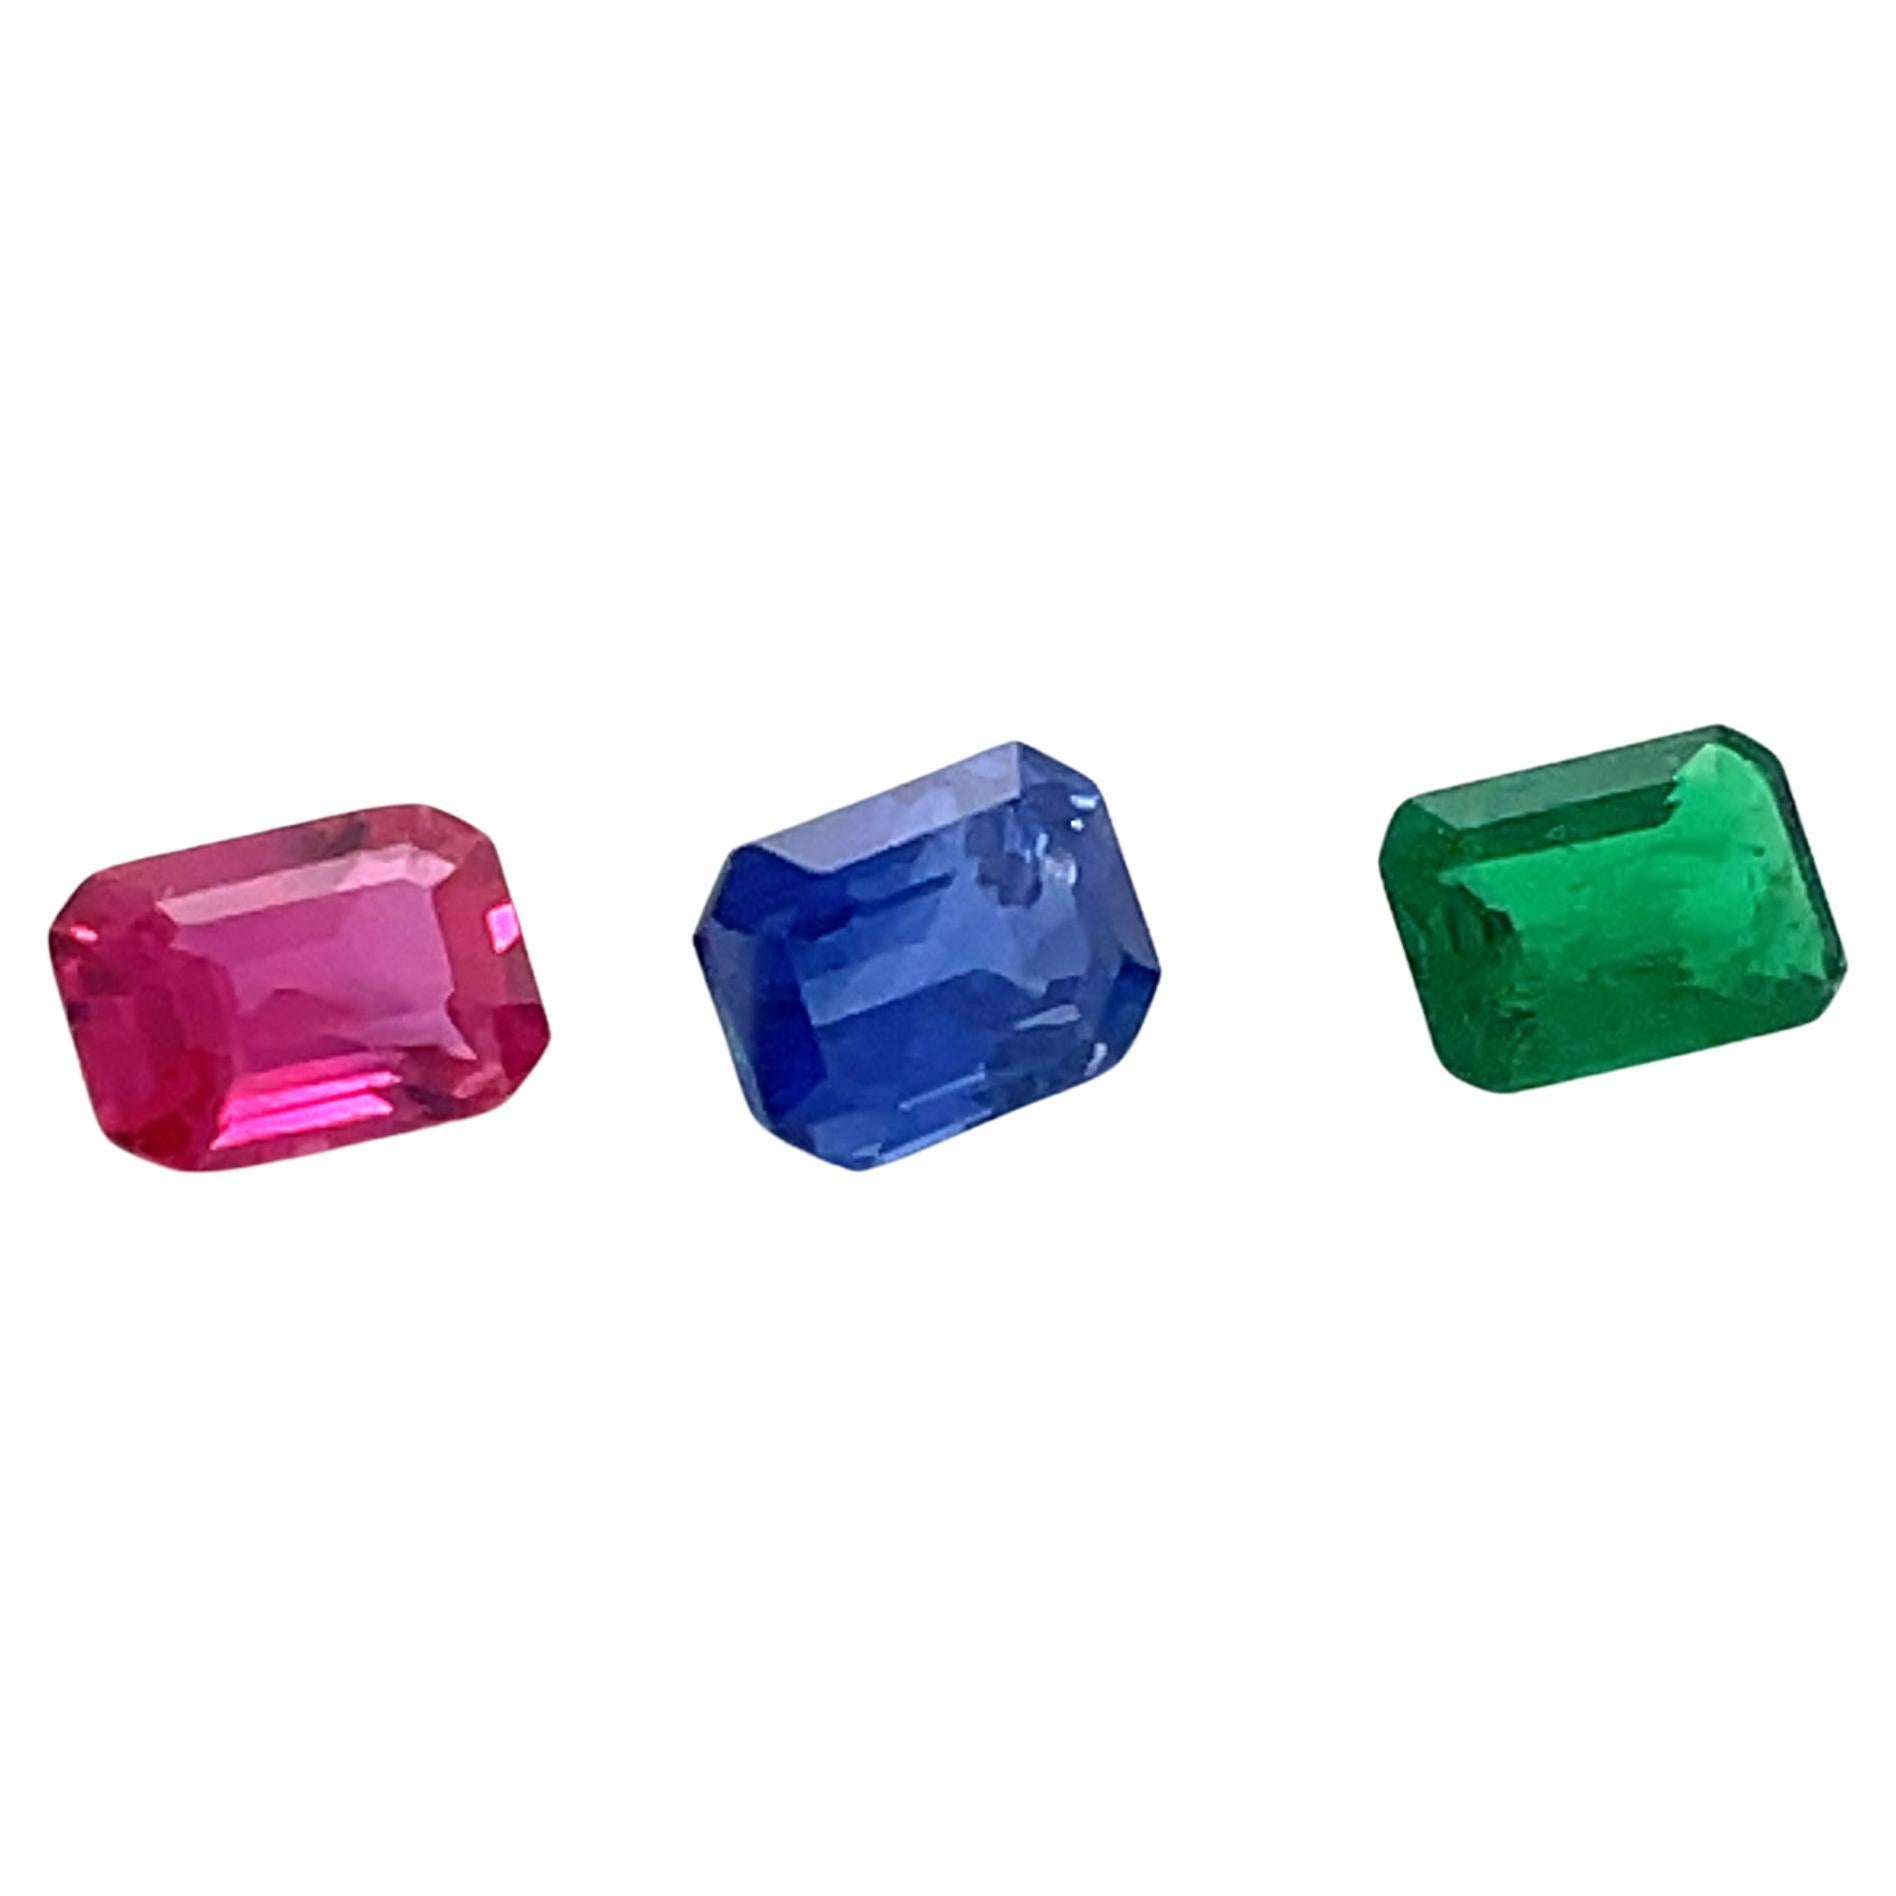 Emerald-Cut Ruby Cts 1.31 and Blue Sapphire Cts 2.16 and Emerald Cts 0.92 Loose 